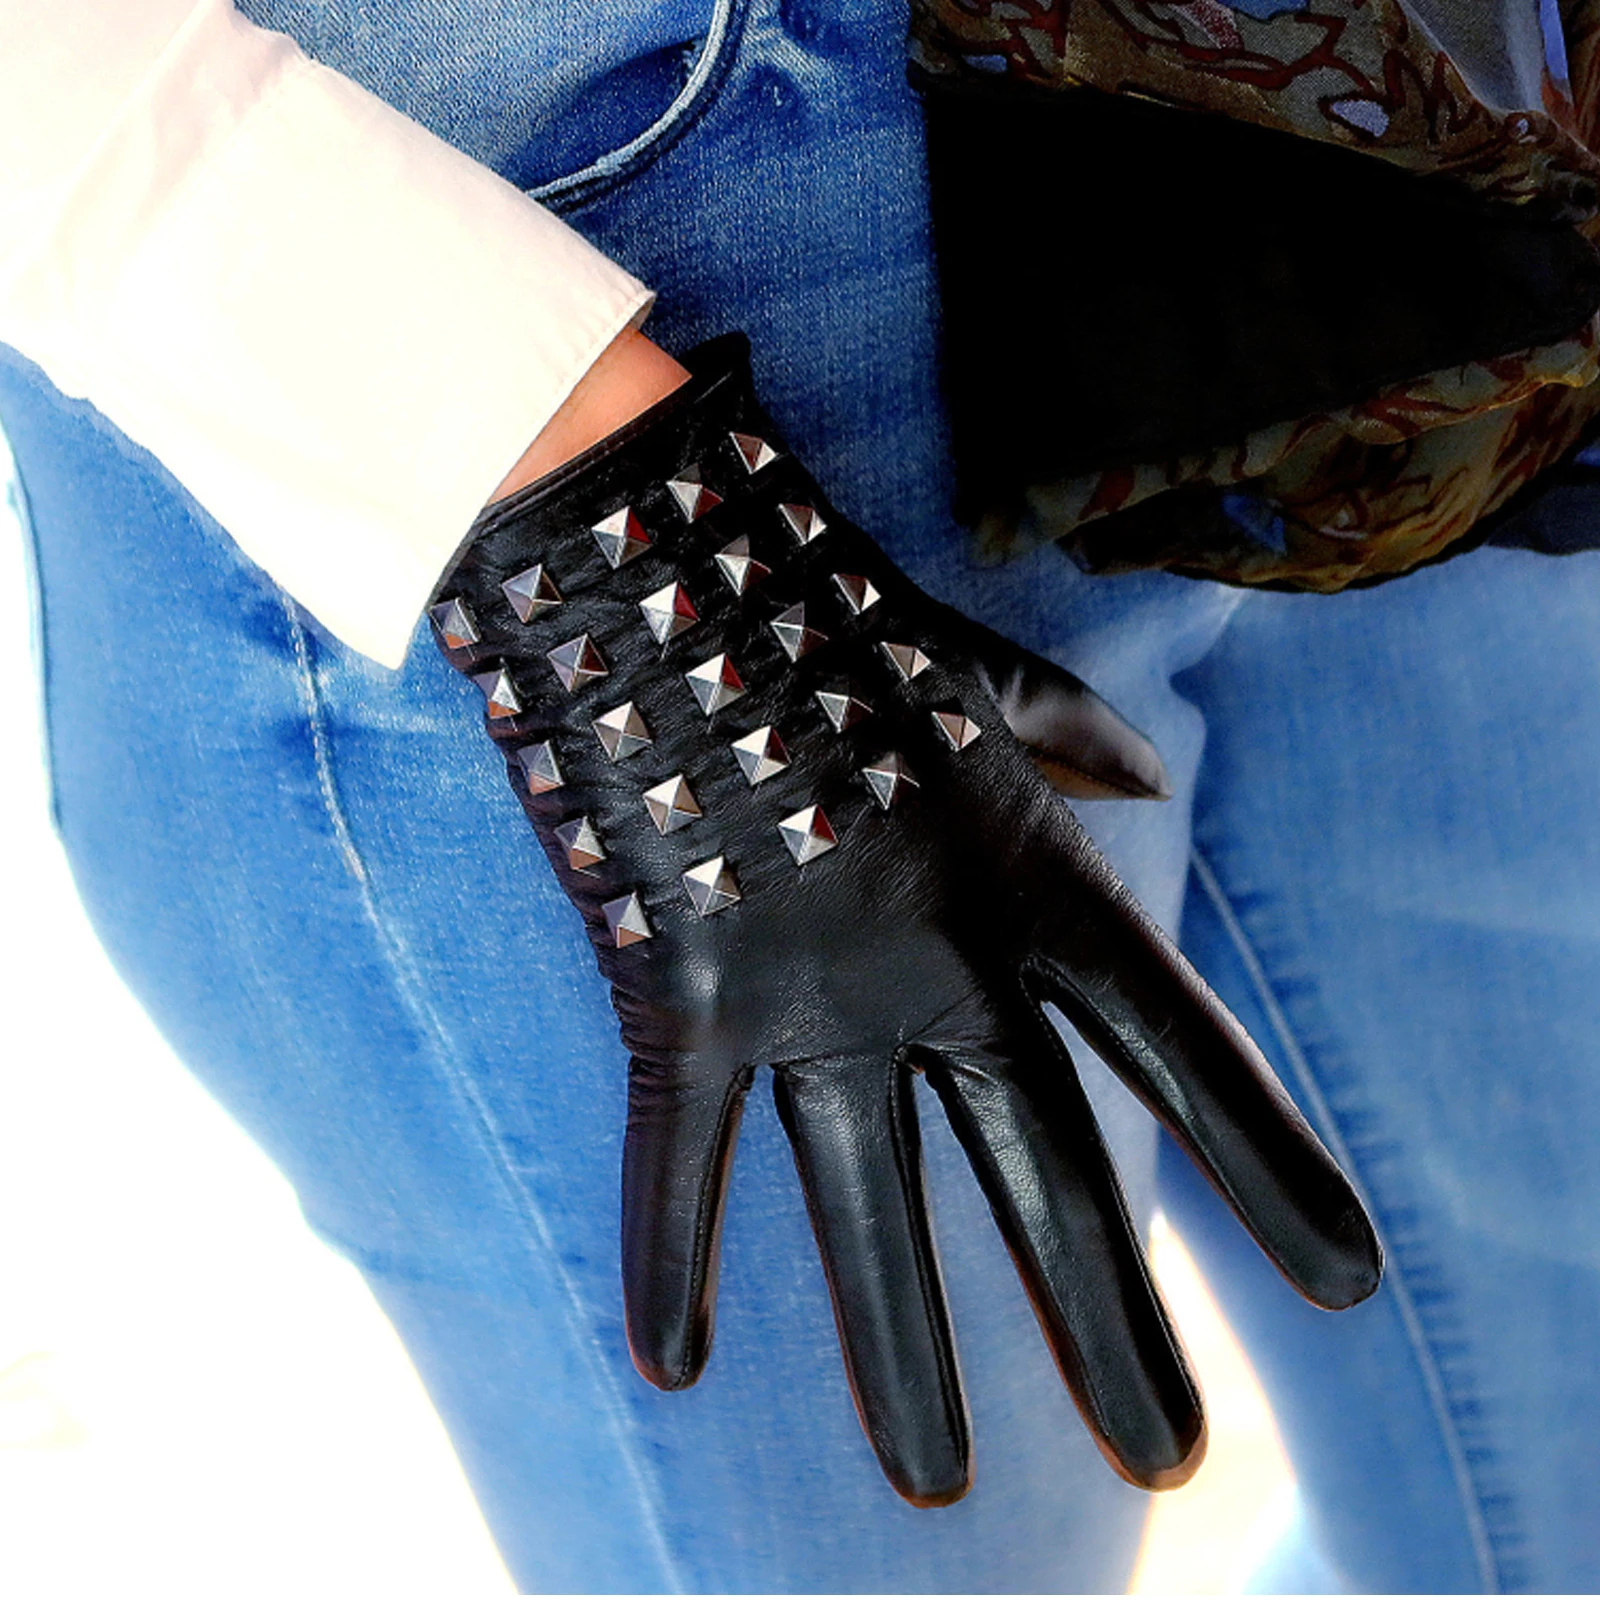 

DooWay Genuine Leather Short Gloves with Studs Fully Studed Real Lambskin Sheepskin TECH Winter Warm Party Cosplay Driving Glove